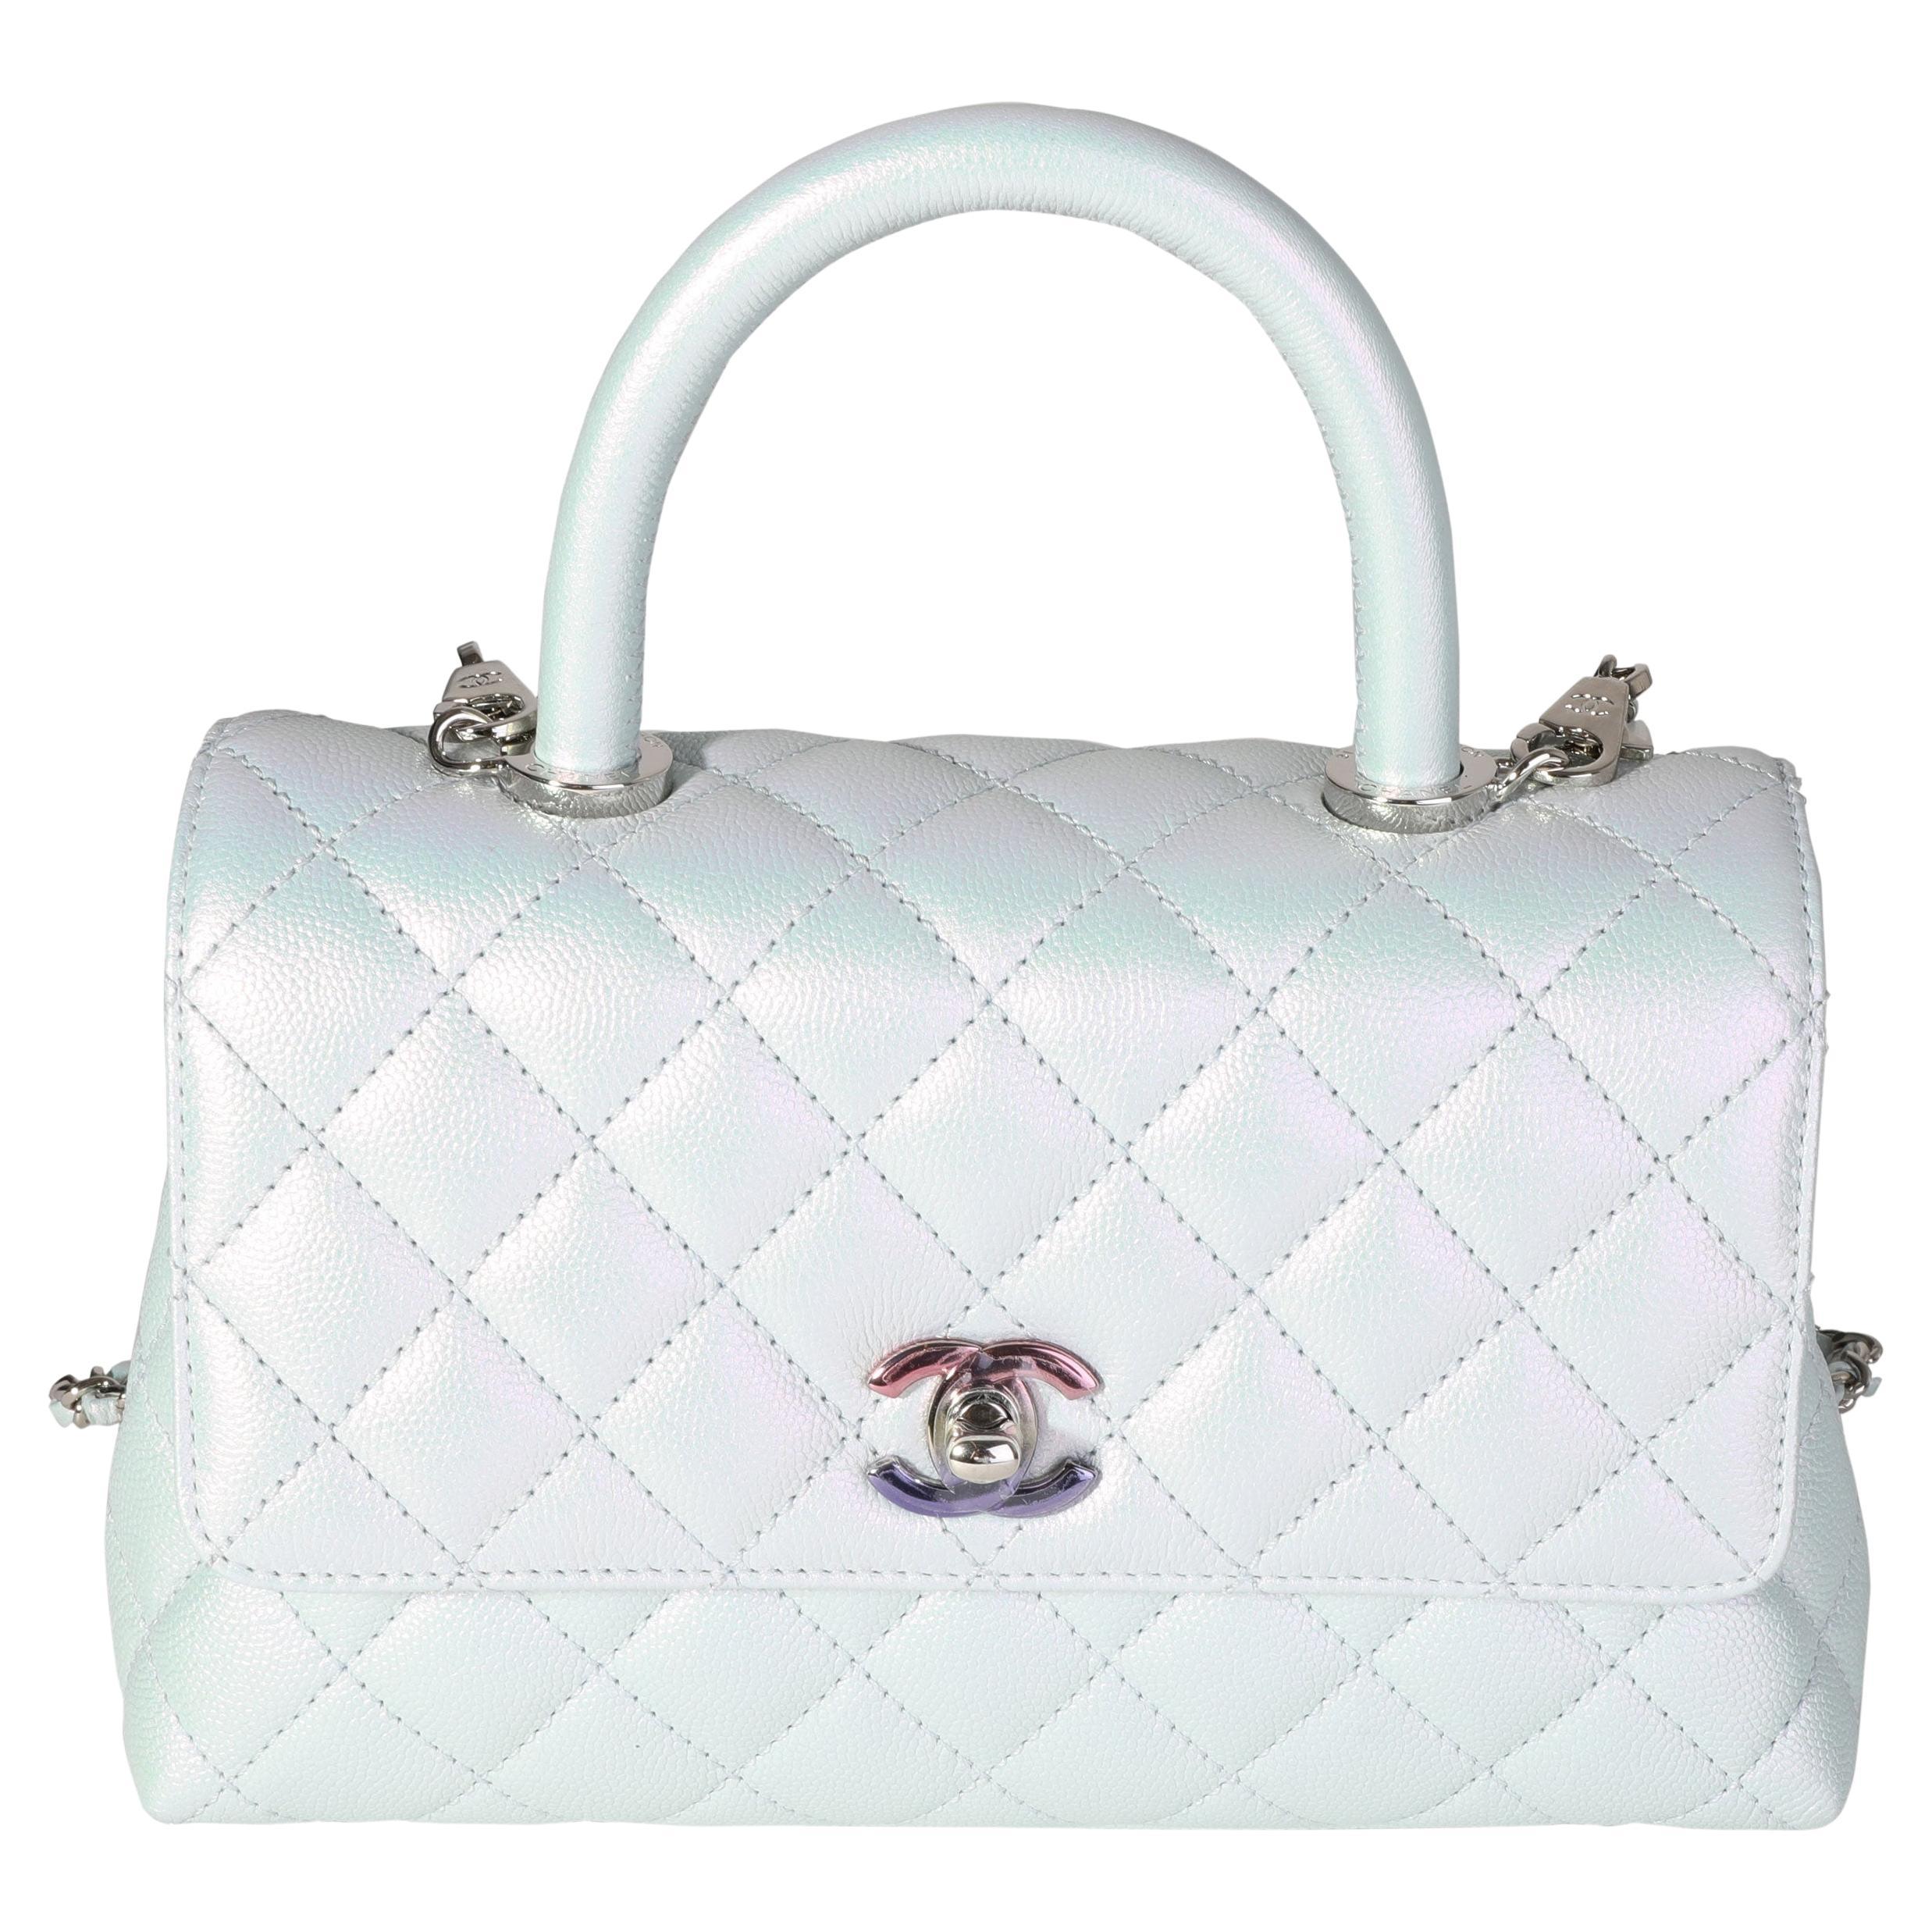 Chanel Iridescent Blue Quilted Caviar Mini Coco Top Handle Flap Bag, myGemma